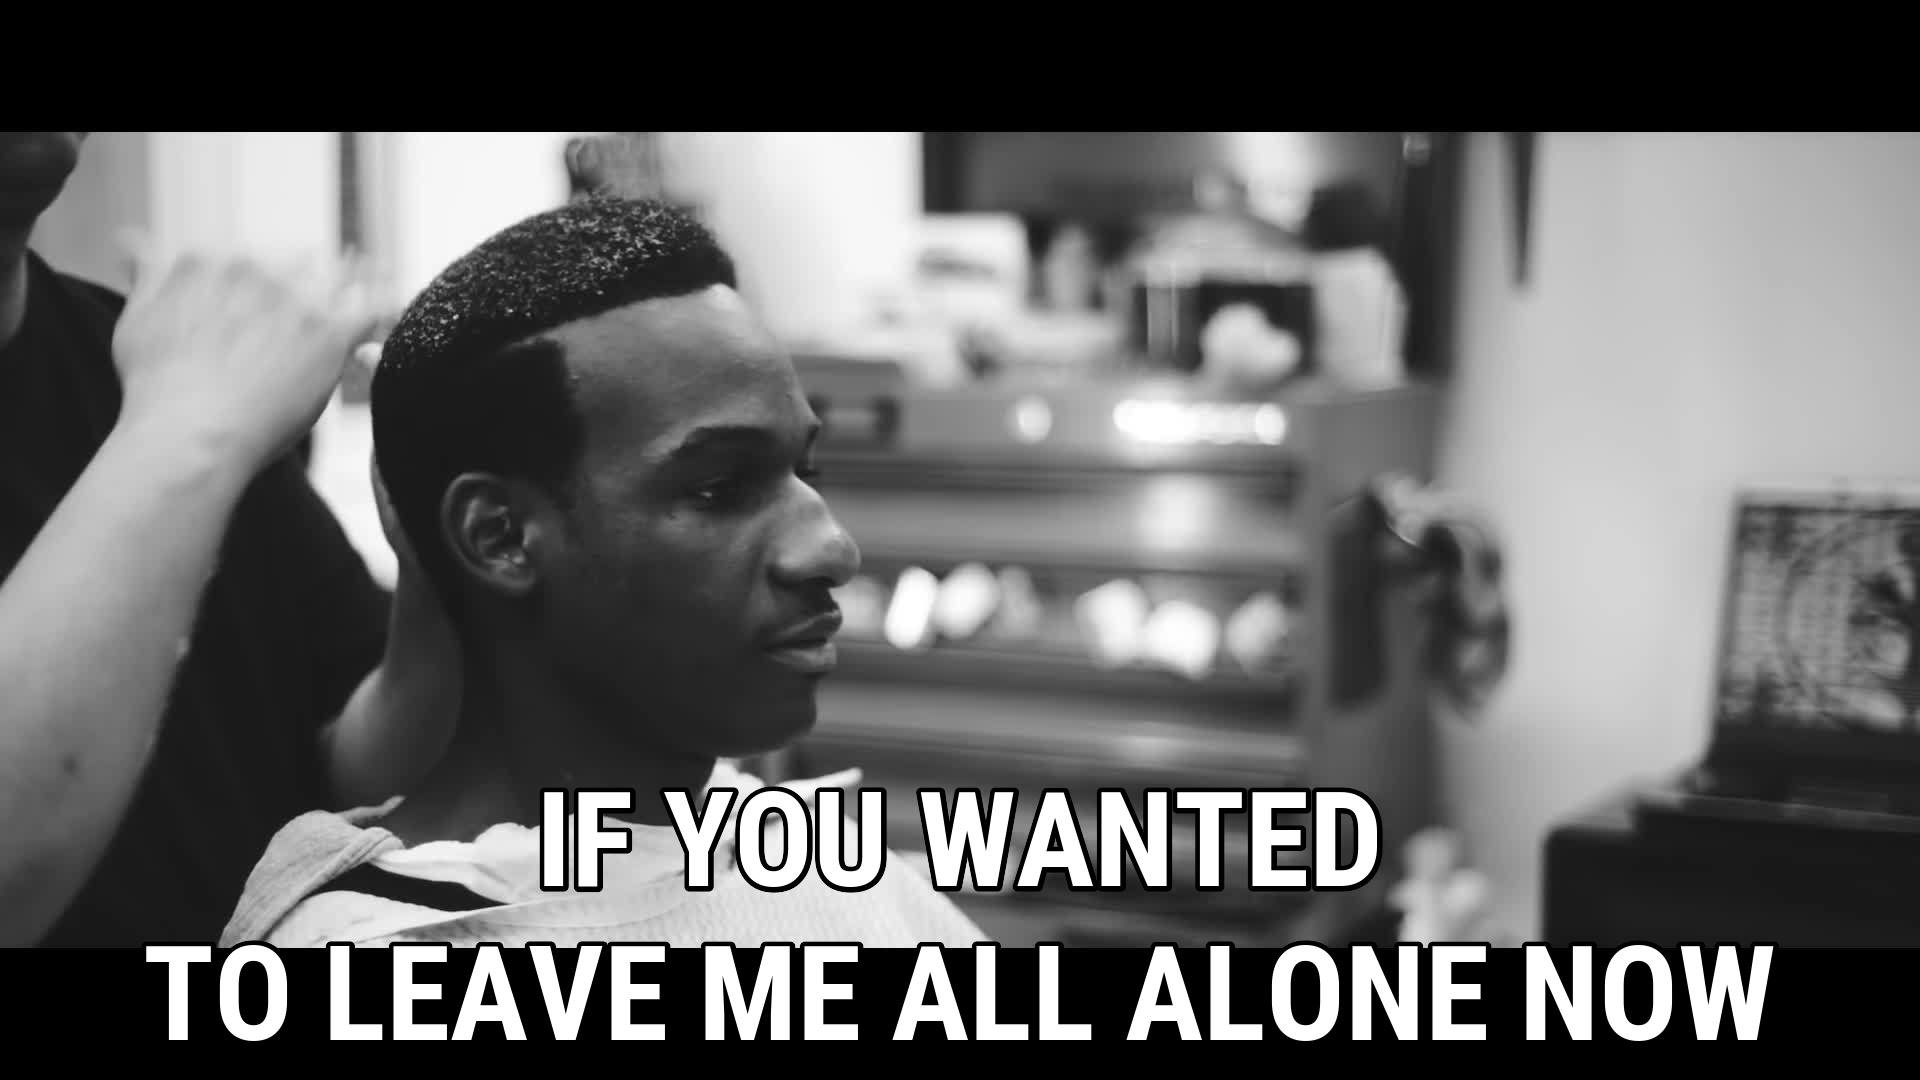 1920x1080 If you wanted to leave me all alone now / Leon Bridges